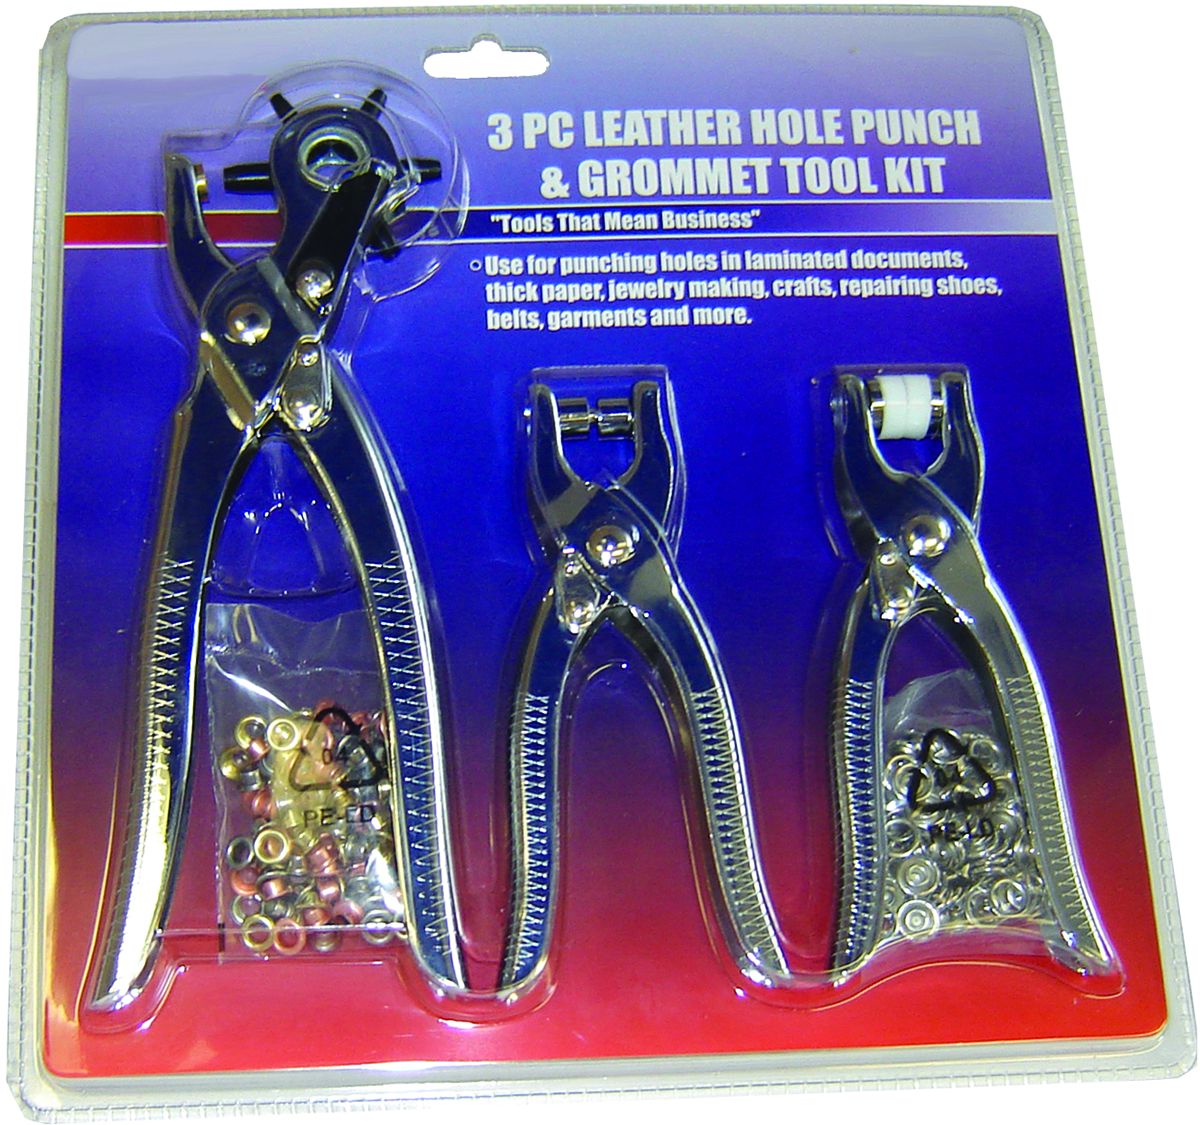 Leather Hole Punch Set - 3 Pieces